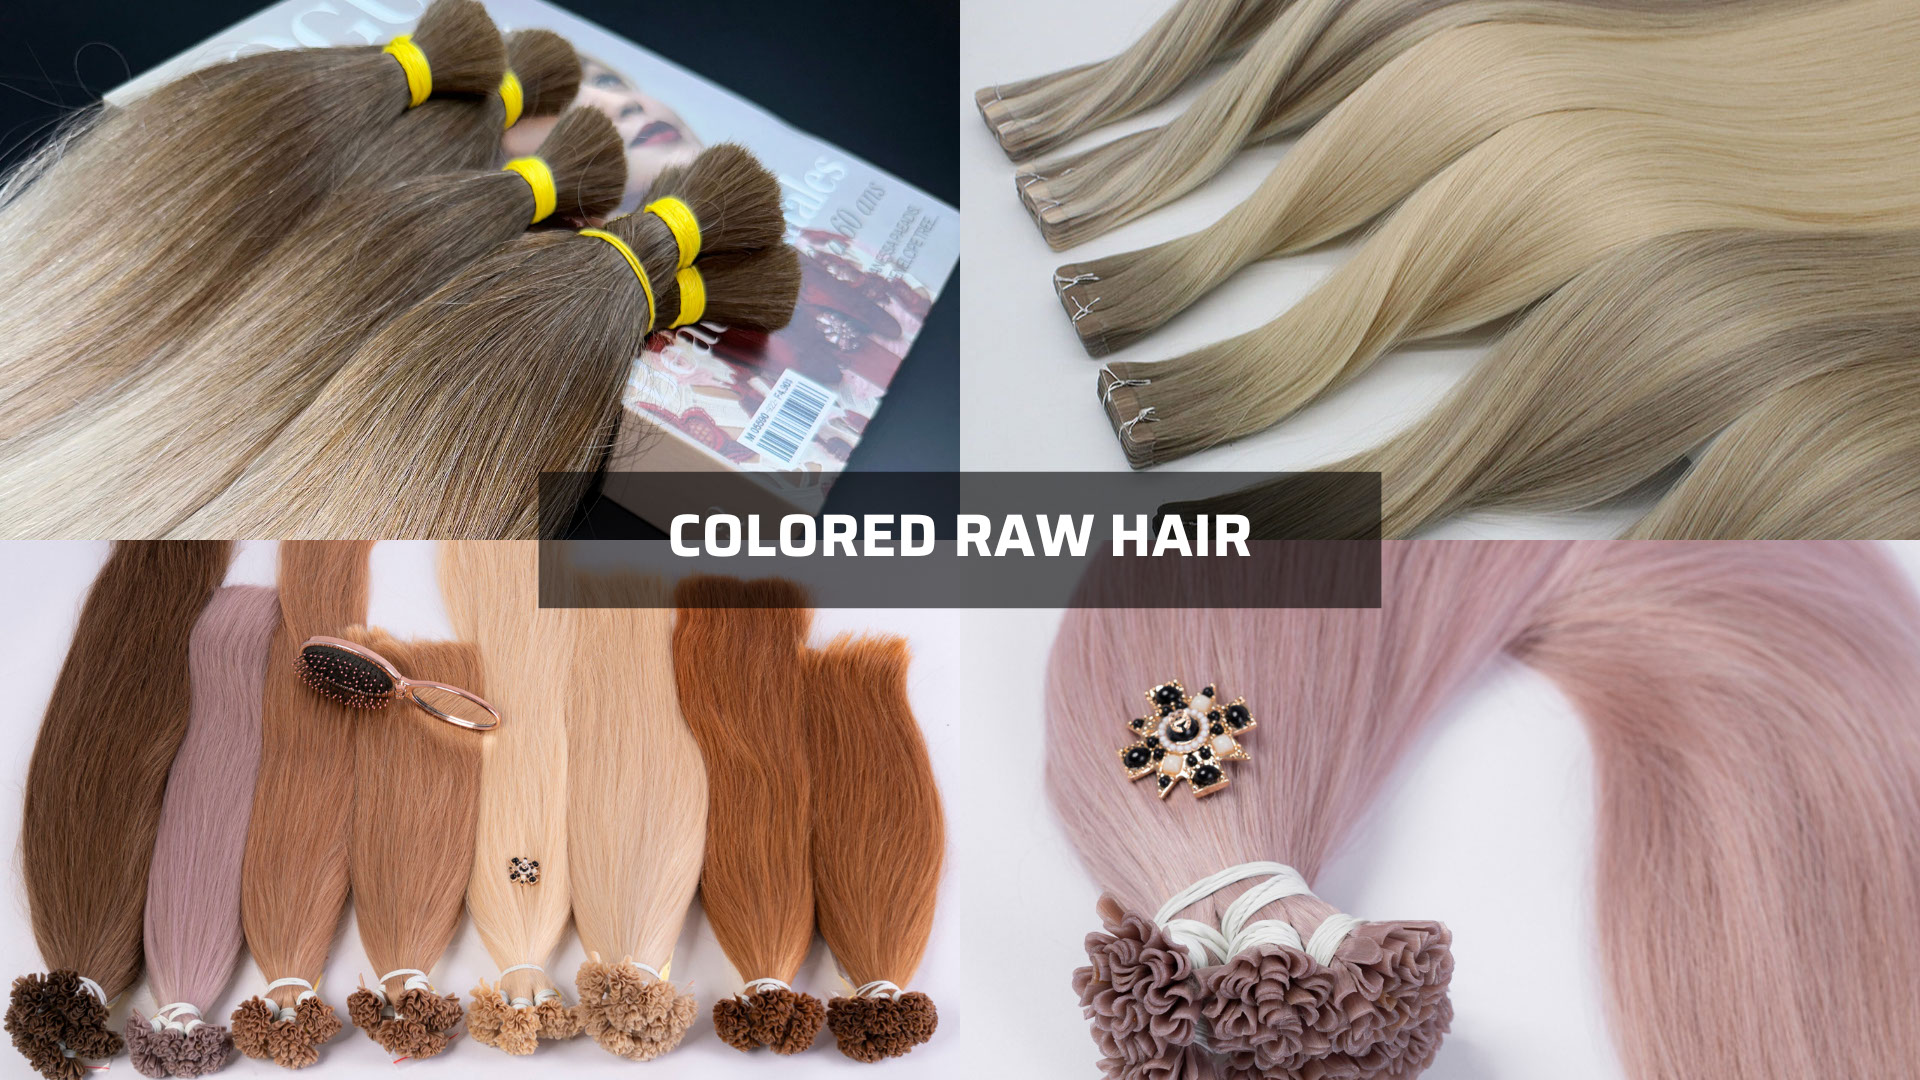 Dyed colored raw hair from wholesale hair vendors